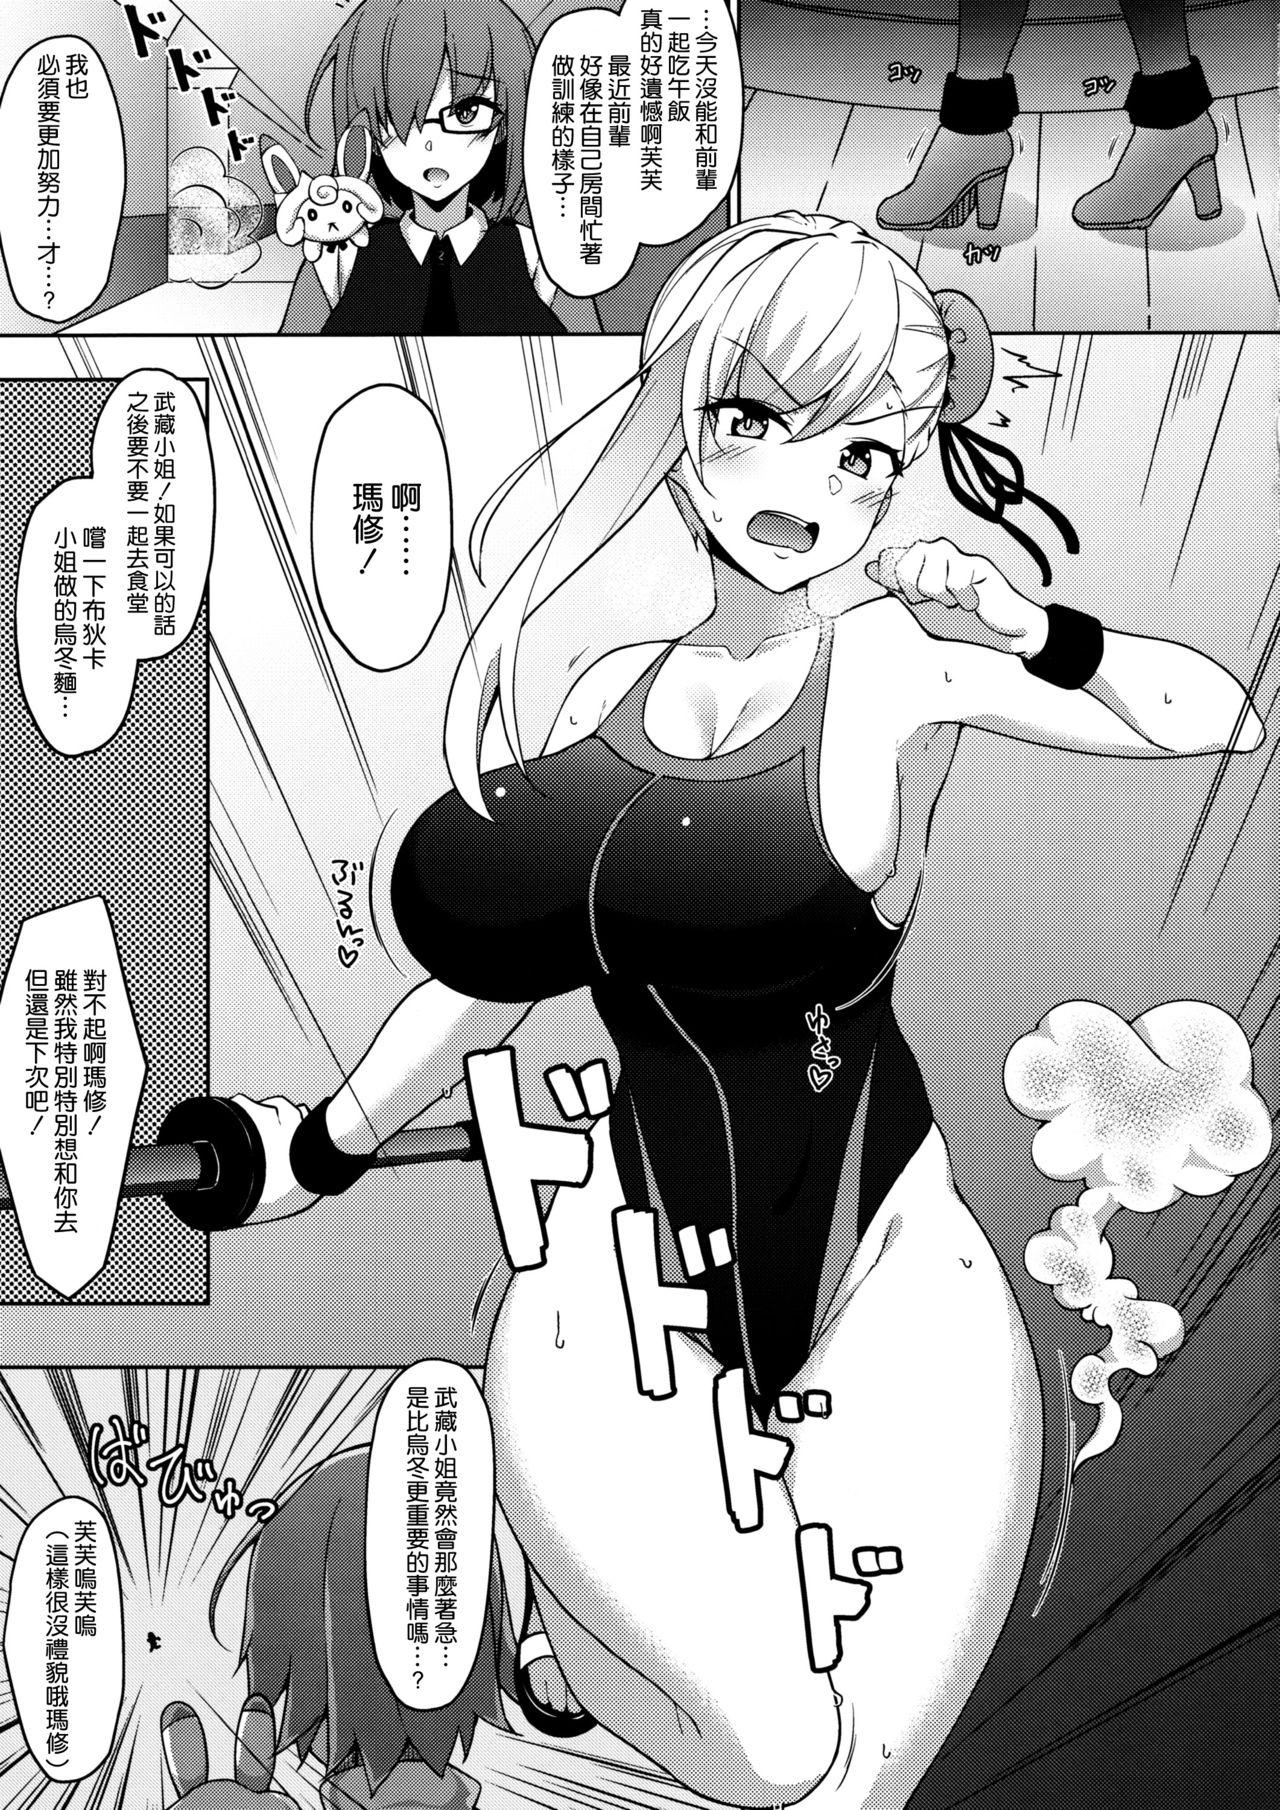 Skinny (C97) [Cow Lipid (Fuurai)] U-D-N-S (Fate/Grand Order) [Chinese] [空気系☆漢化] - Fate grand order Doggystyle - Page 5